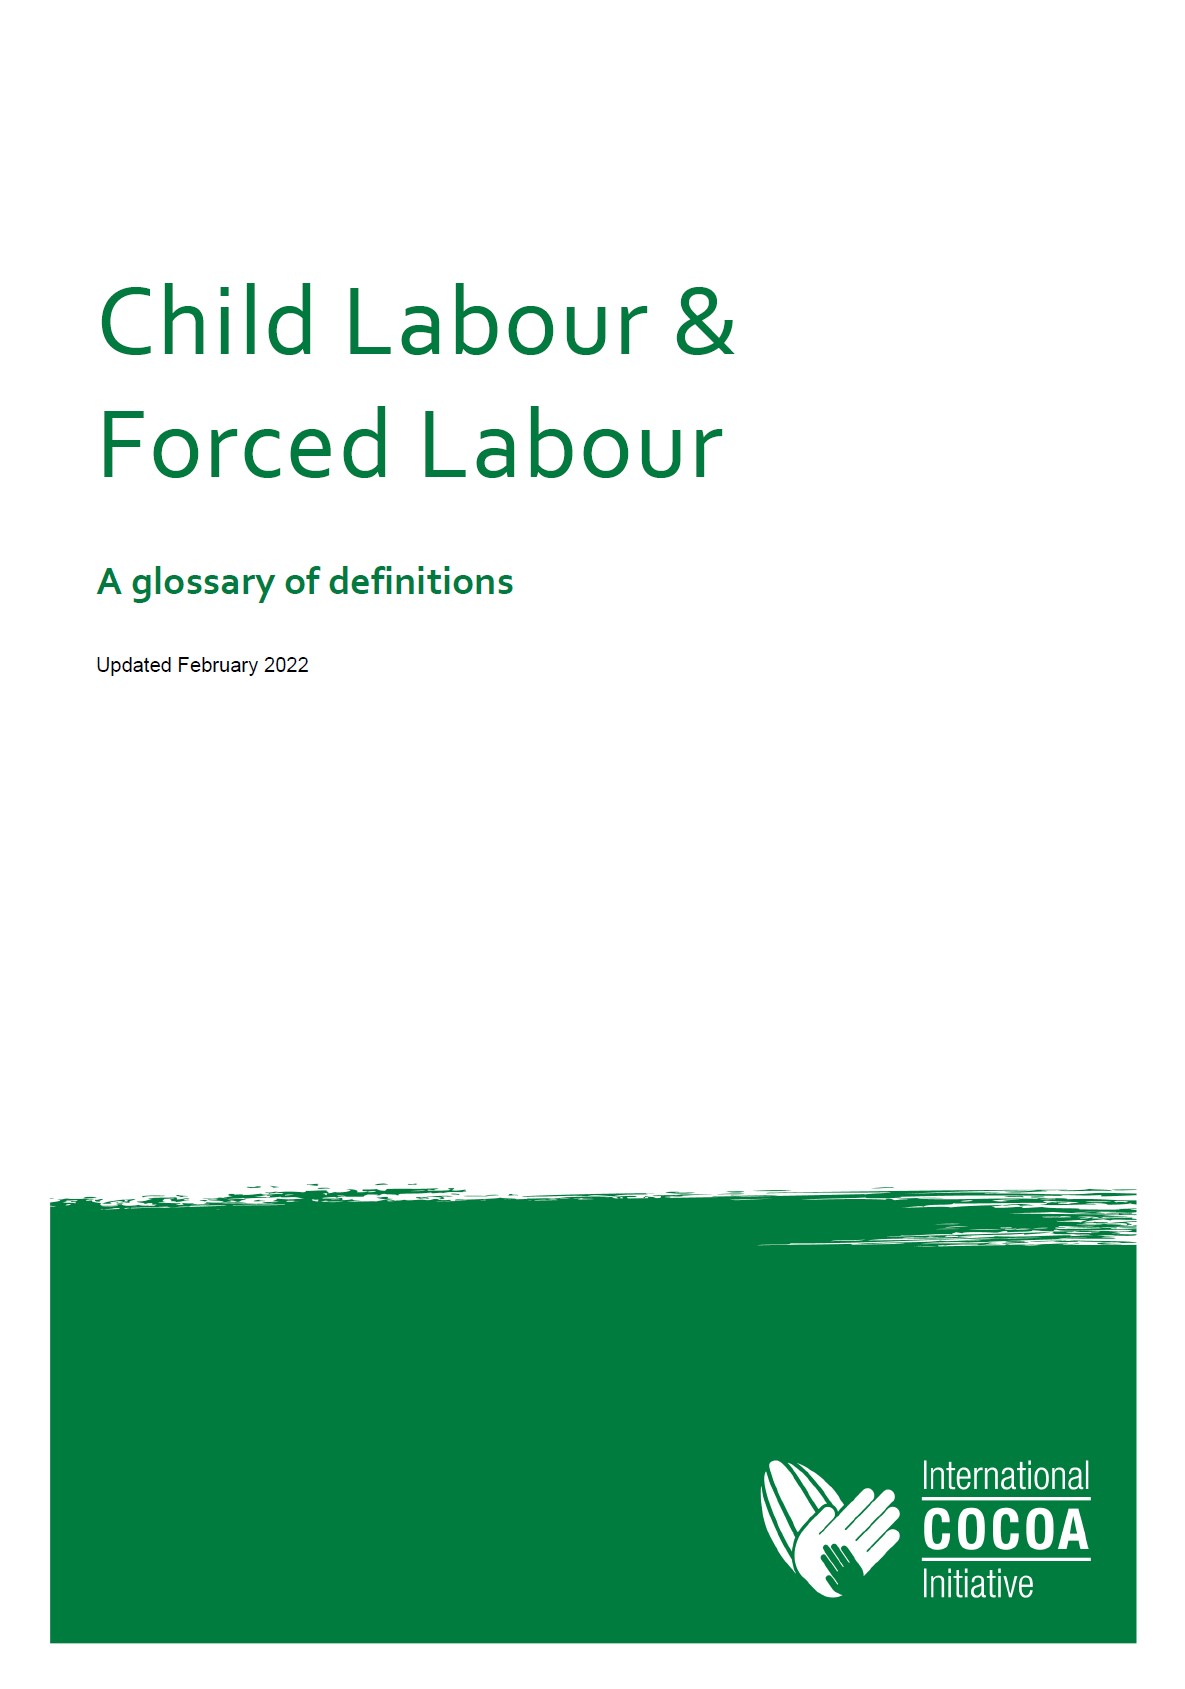 child labour and forced labour glossary of definitions